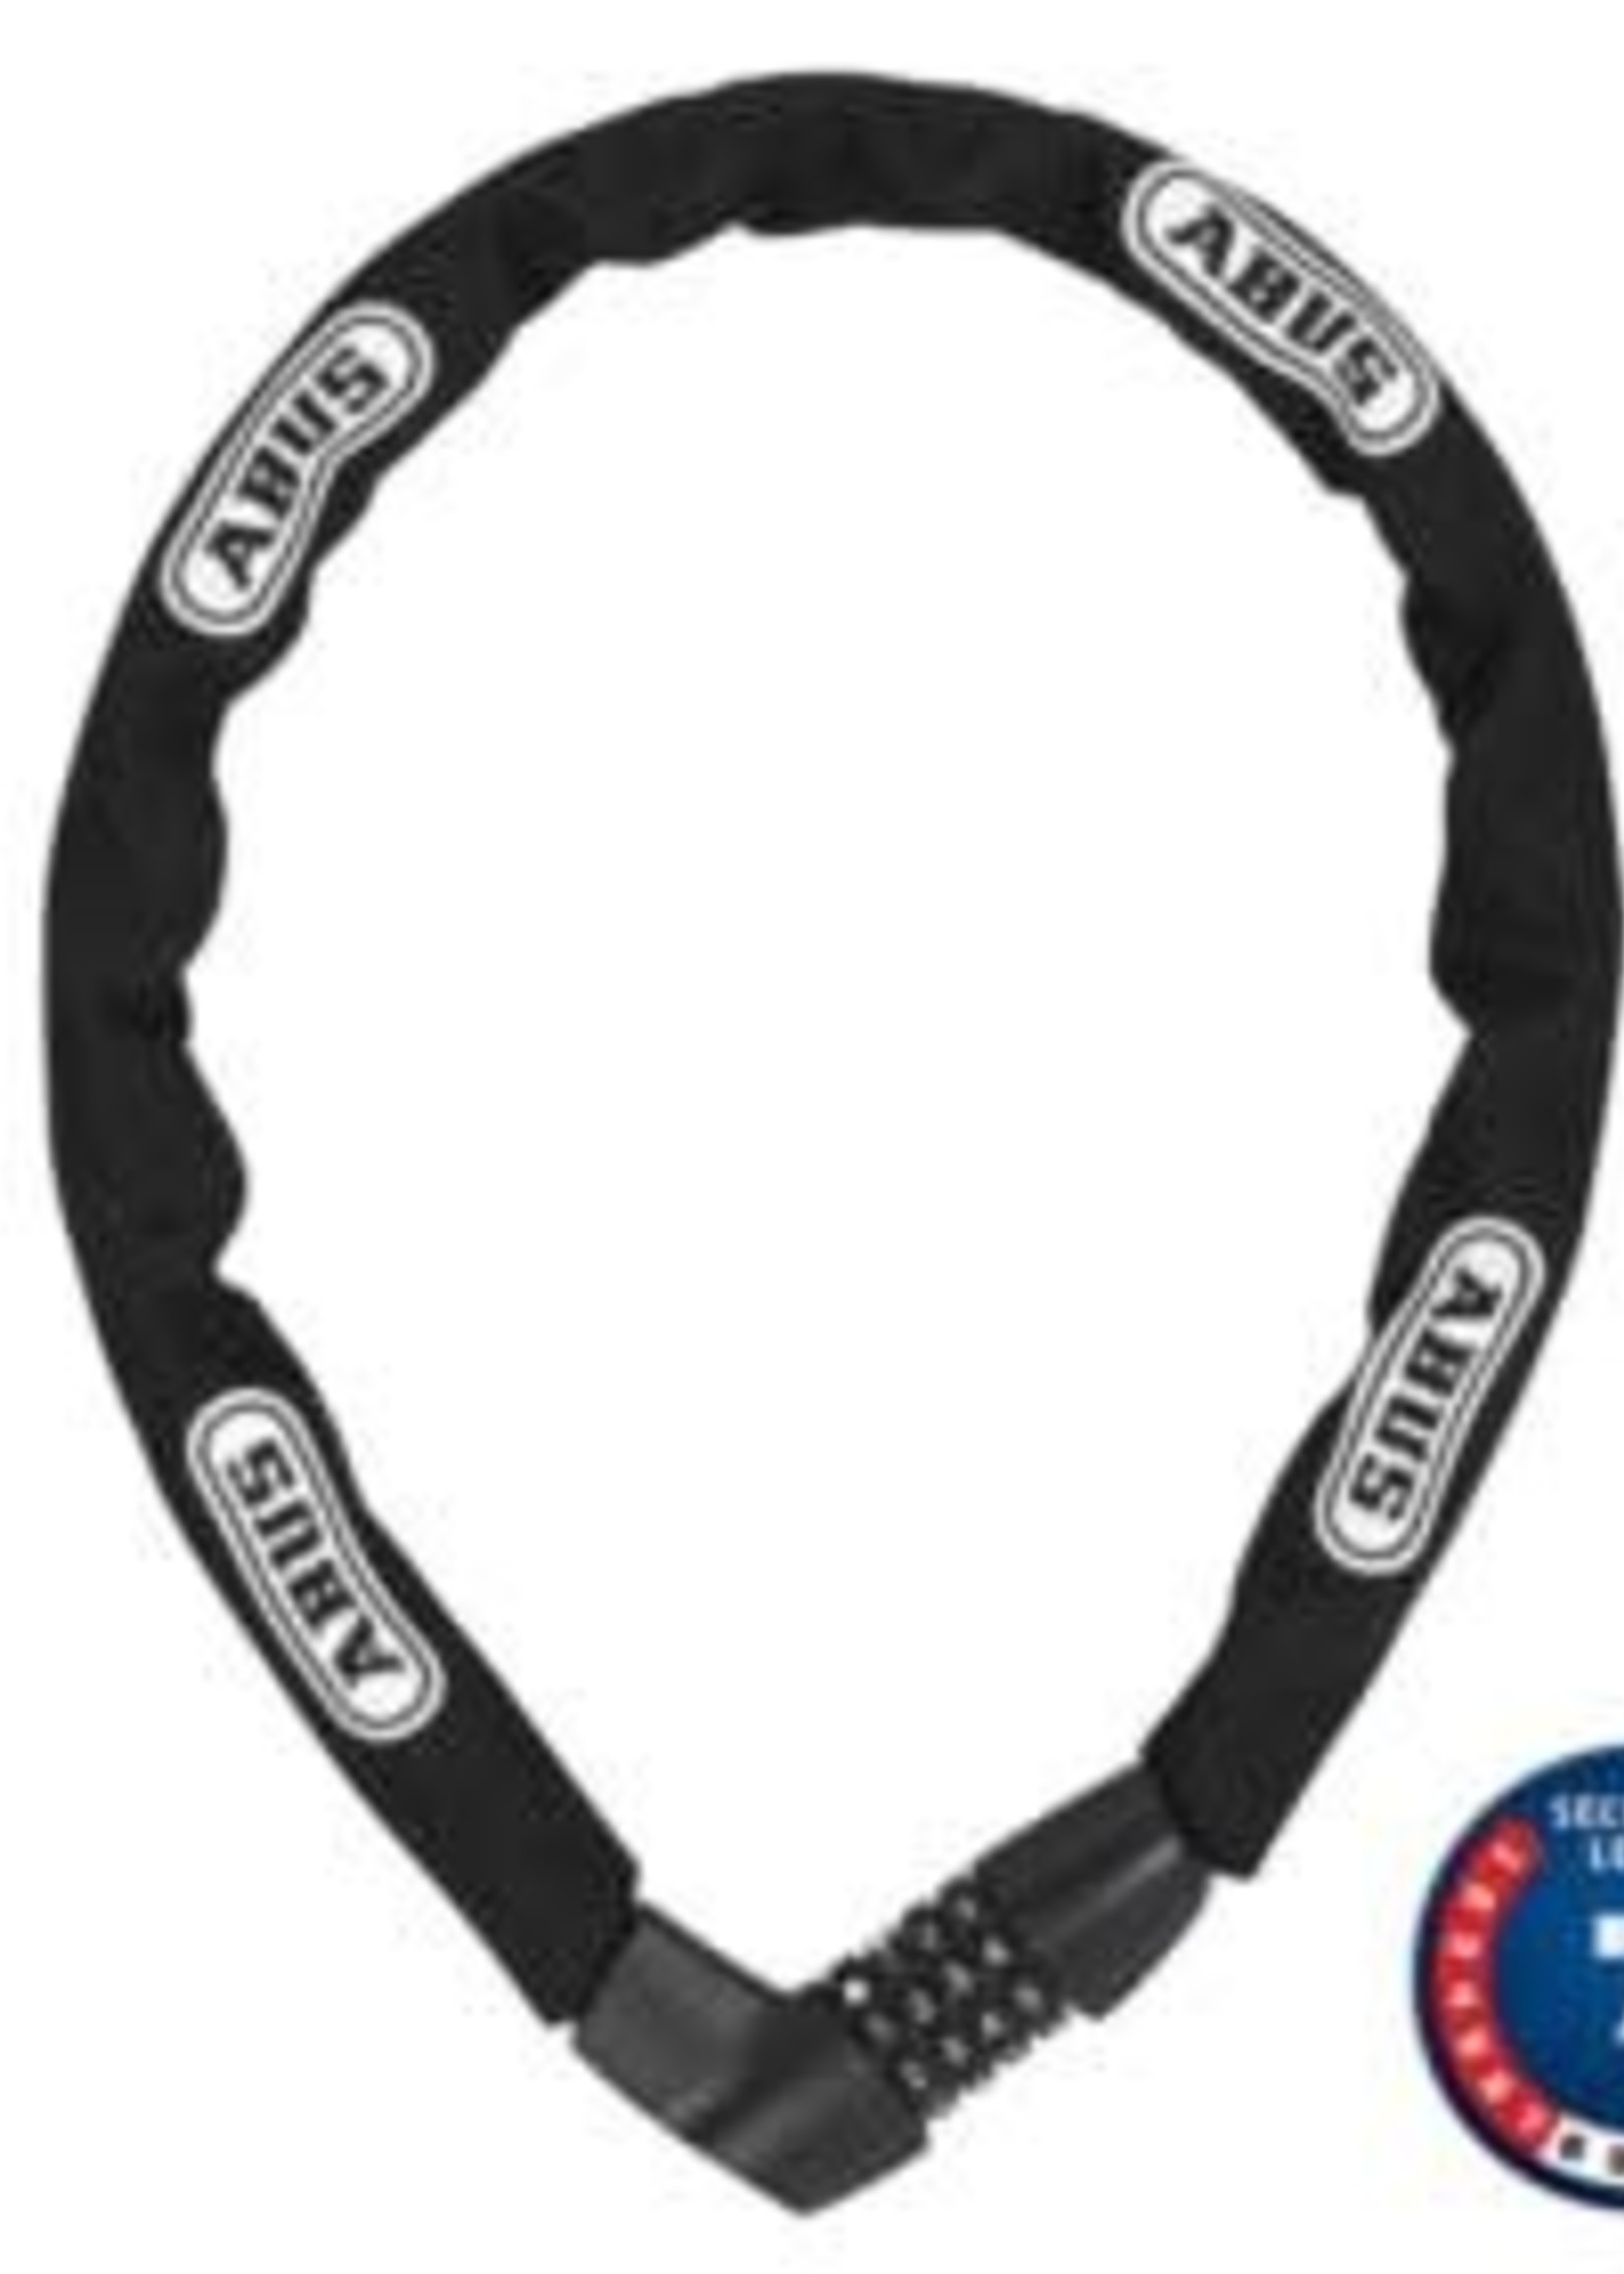 Abus Abus, Steel--Chain 5805C Chain with cmbinatin lck, 5mm x 110cm (5mm x 3.6'), Black